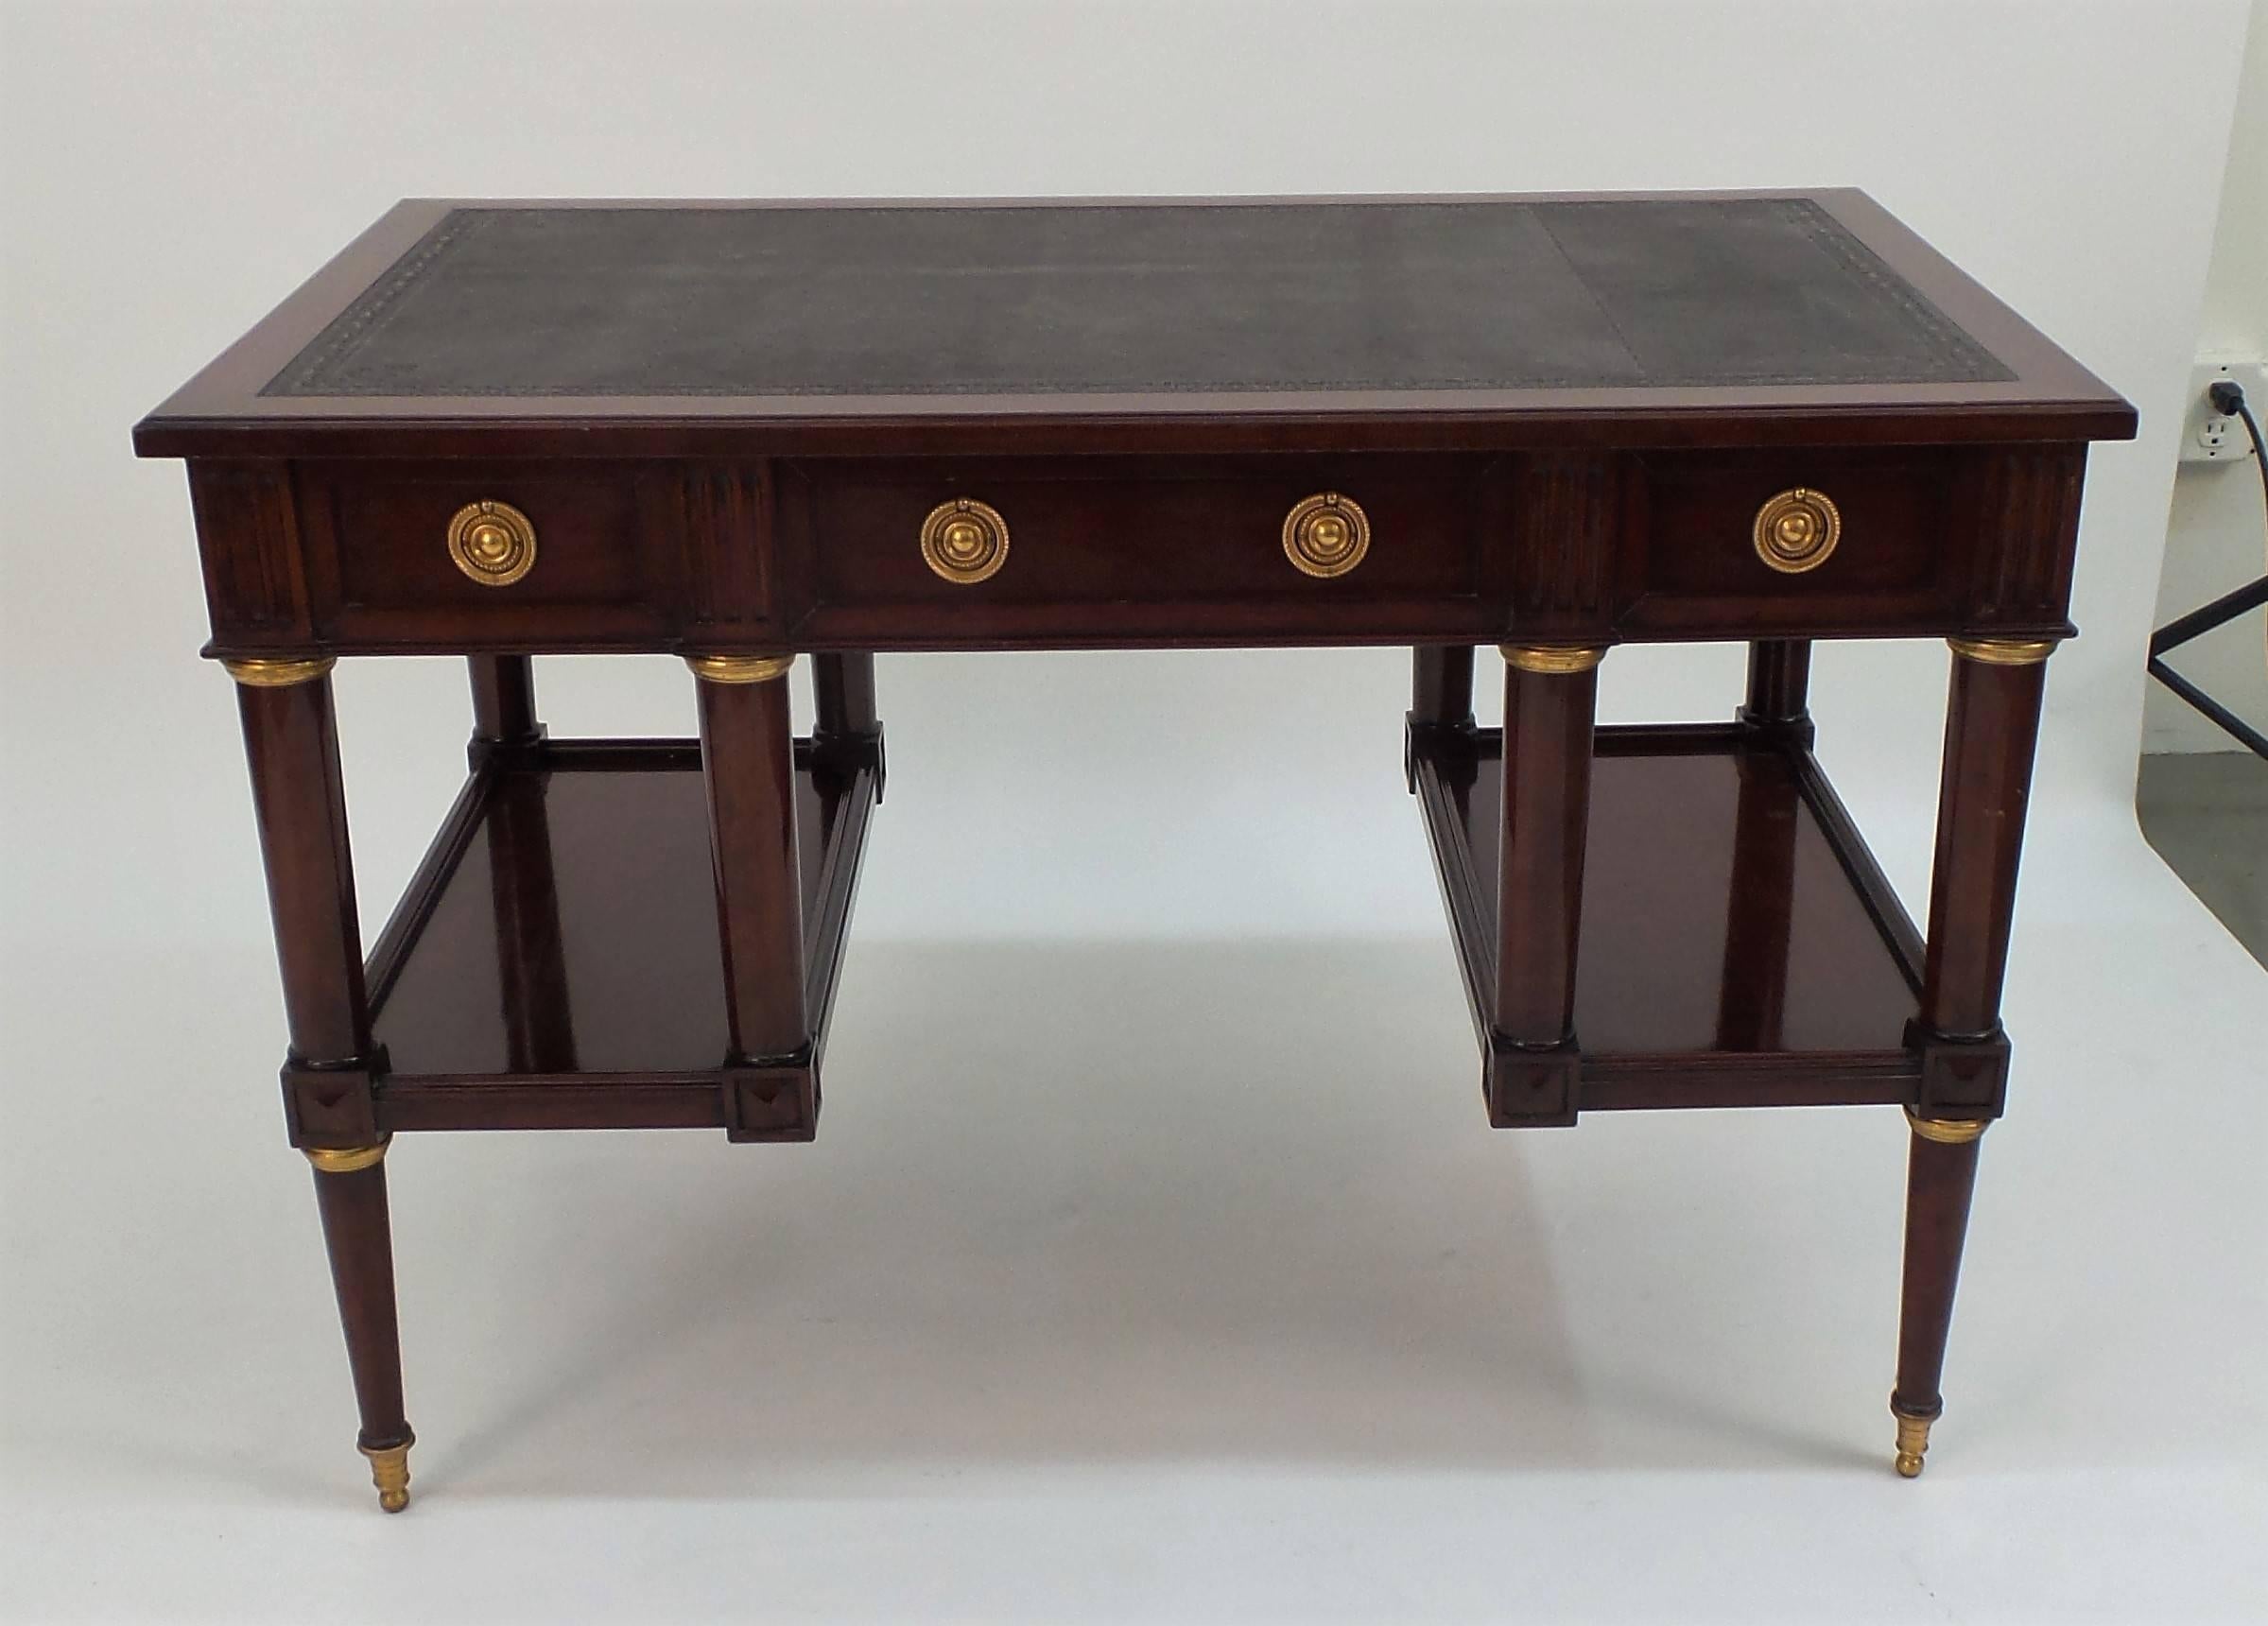 Victoria & Son's Rue du Cirque desk, made in the neoclassical style of Louis XVI with two easily accessible open shelves supported by four legs, with three drawers in the apron and faux-drawer faces on the opposite side. Shown with a blind tooled